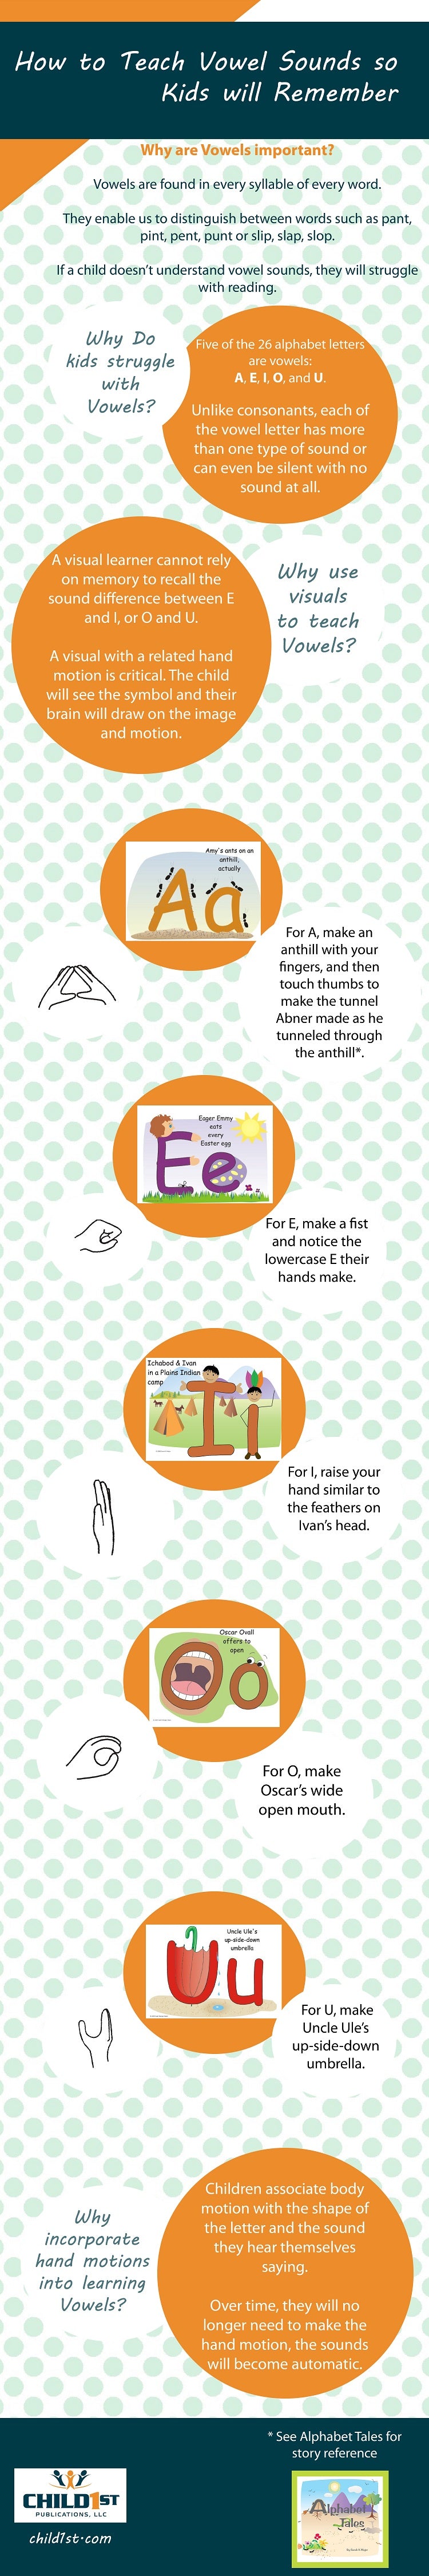 How to Teach Vowels